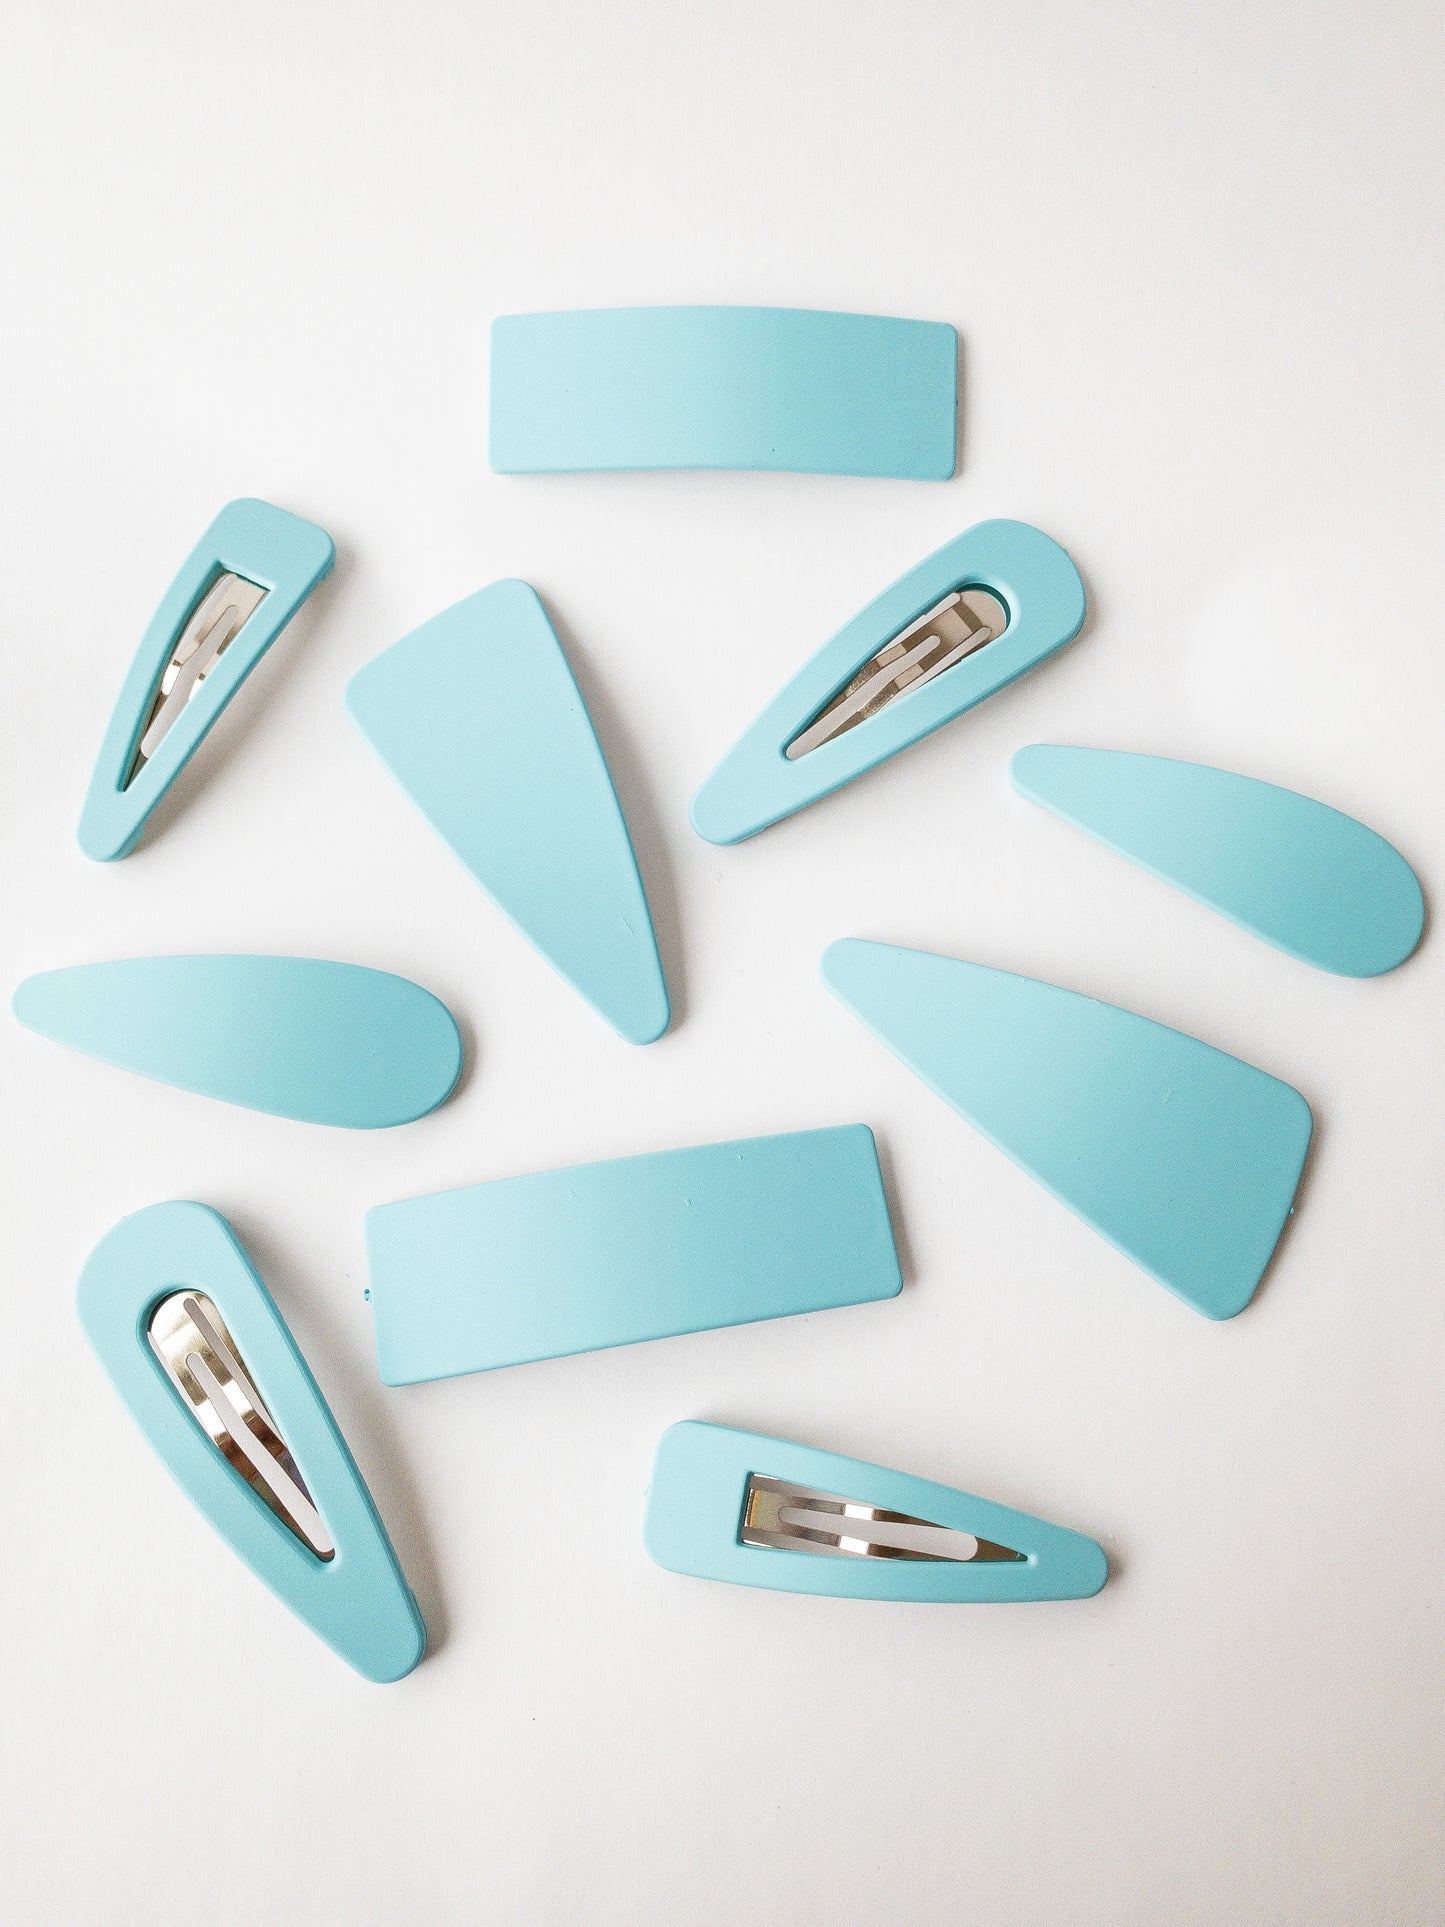 The very best of a classic hair clip! These large snap clip barrettes are your everyday go to and come in a variety of shapes. There are two of each: asymmetrical triangle, triangle outline, solid teardrop, teardrop outline, and solid rectangle. Each set comes in an easy to store box and the matte colors are a must have!